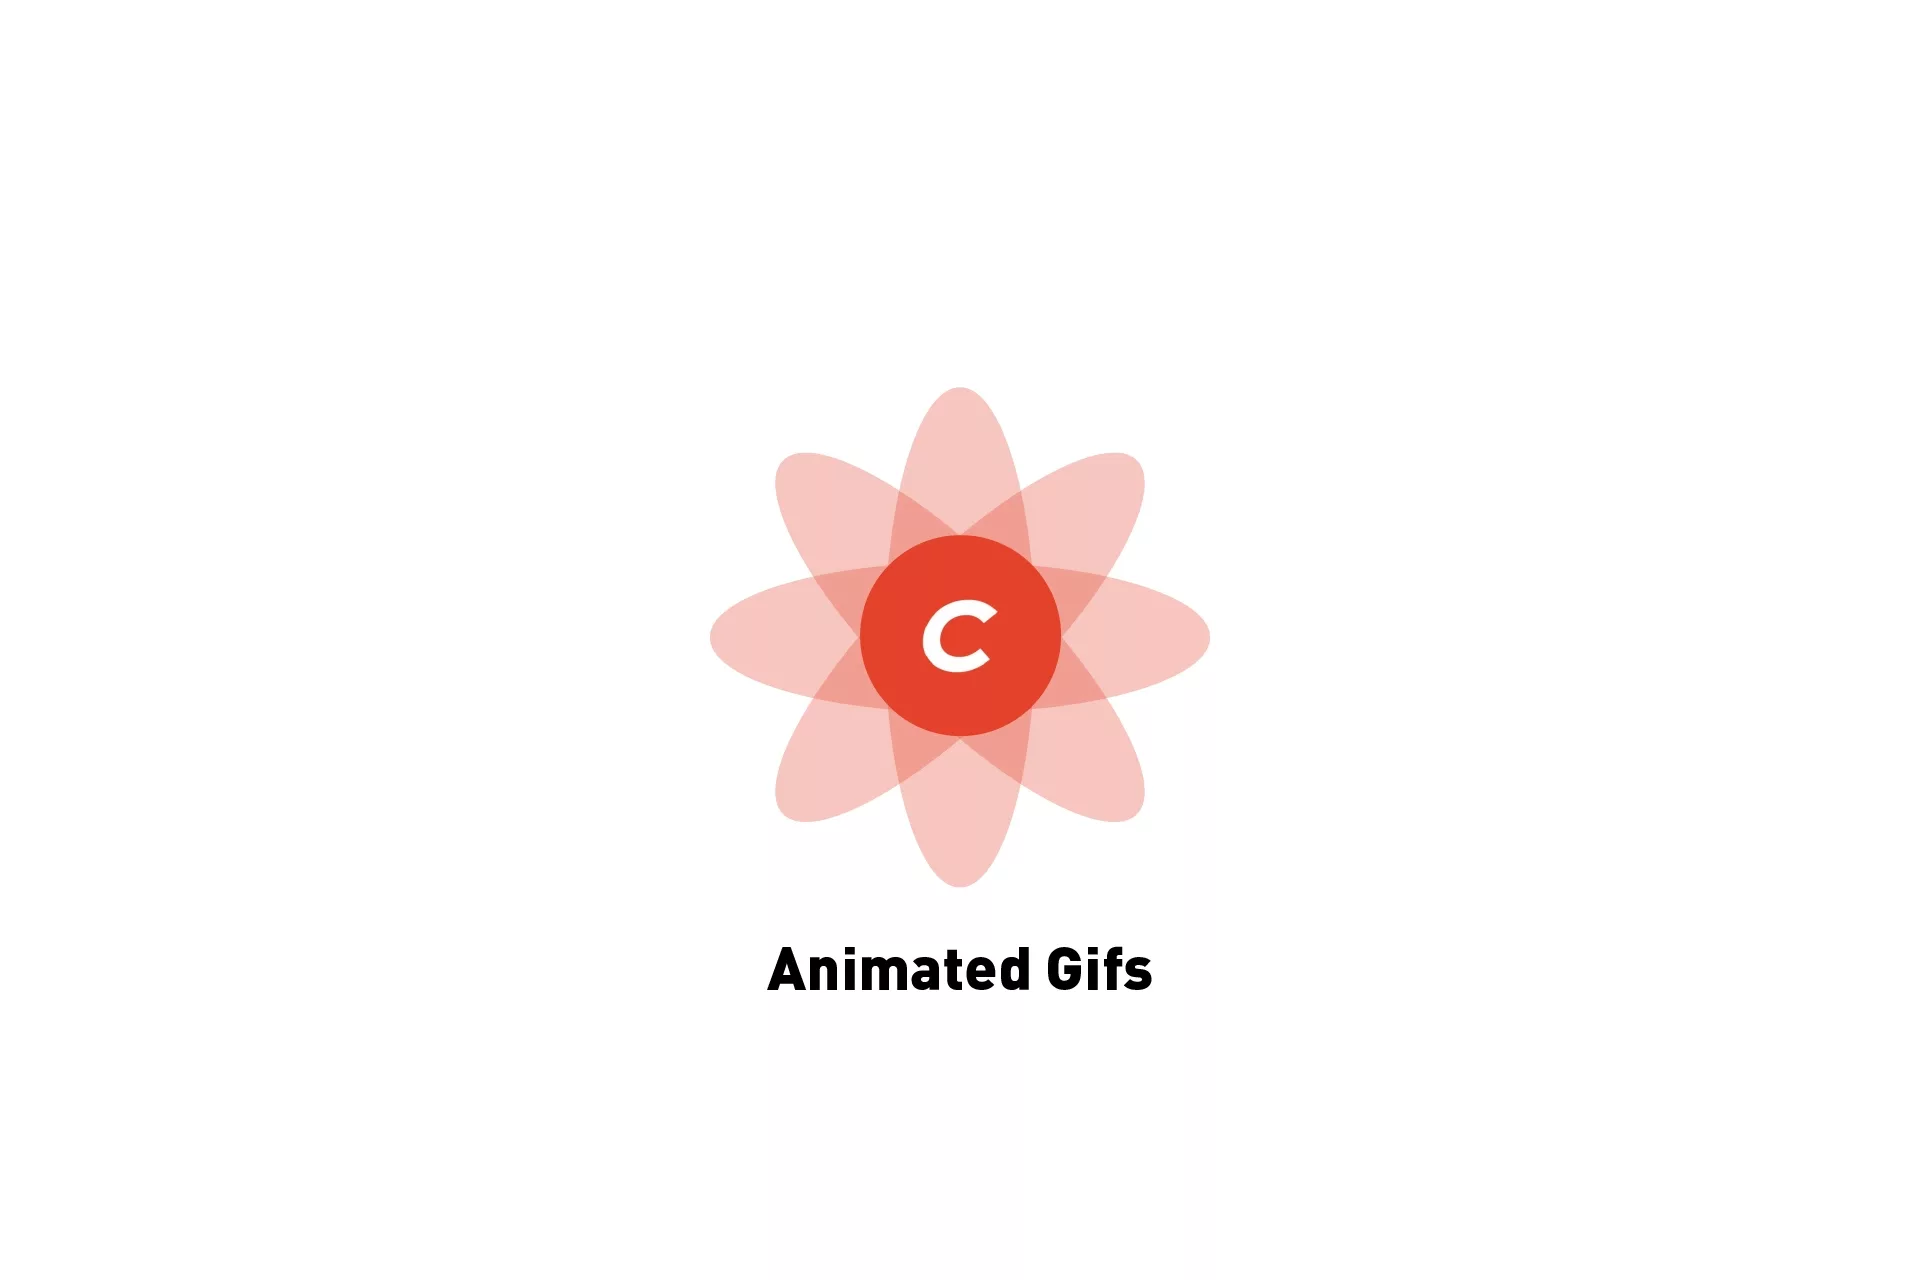 A Craft CMS Flower with the text 'Animated Gifs' beneath it.